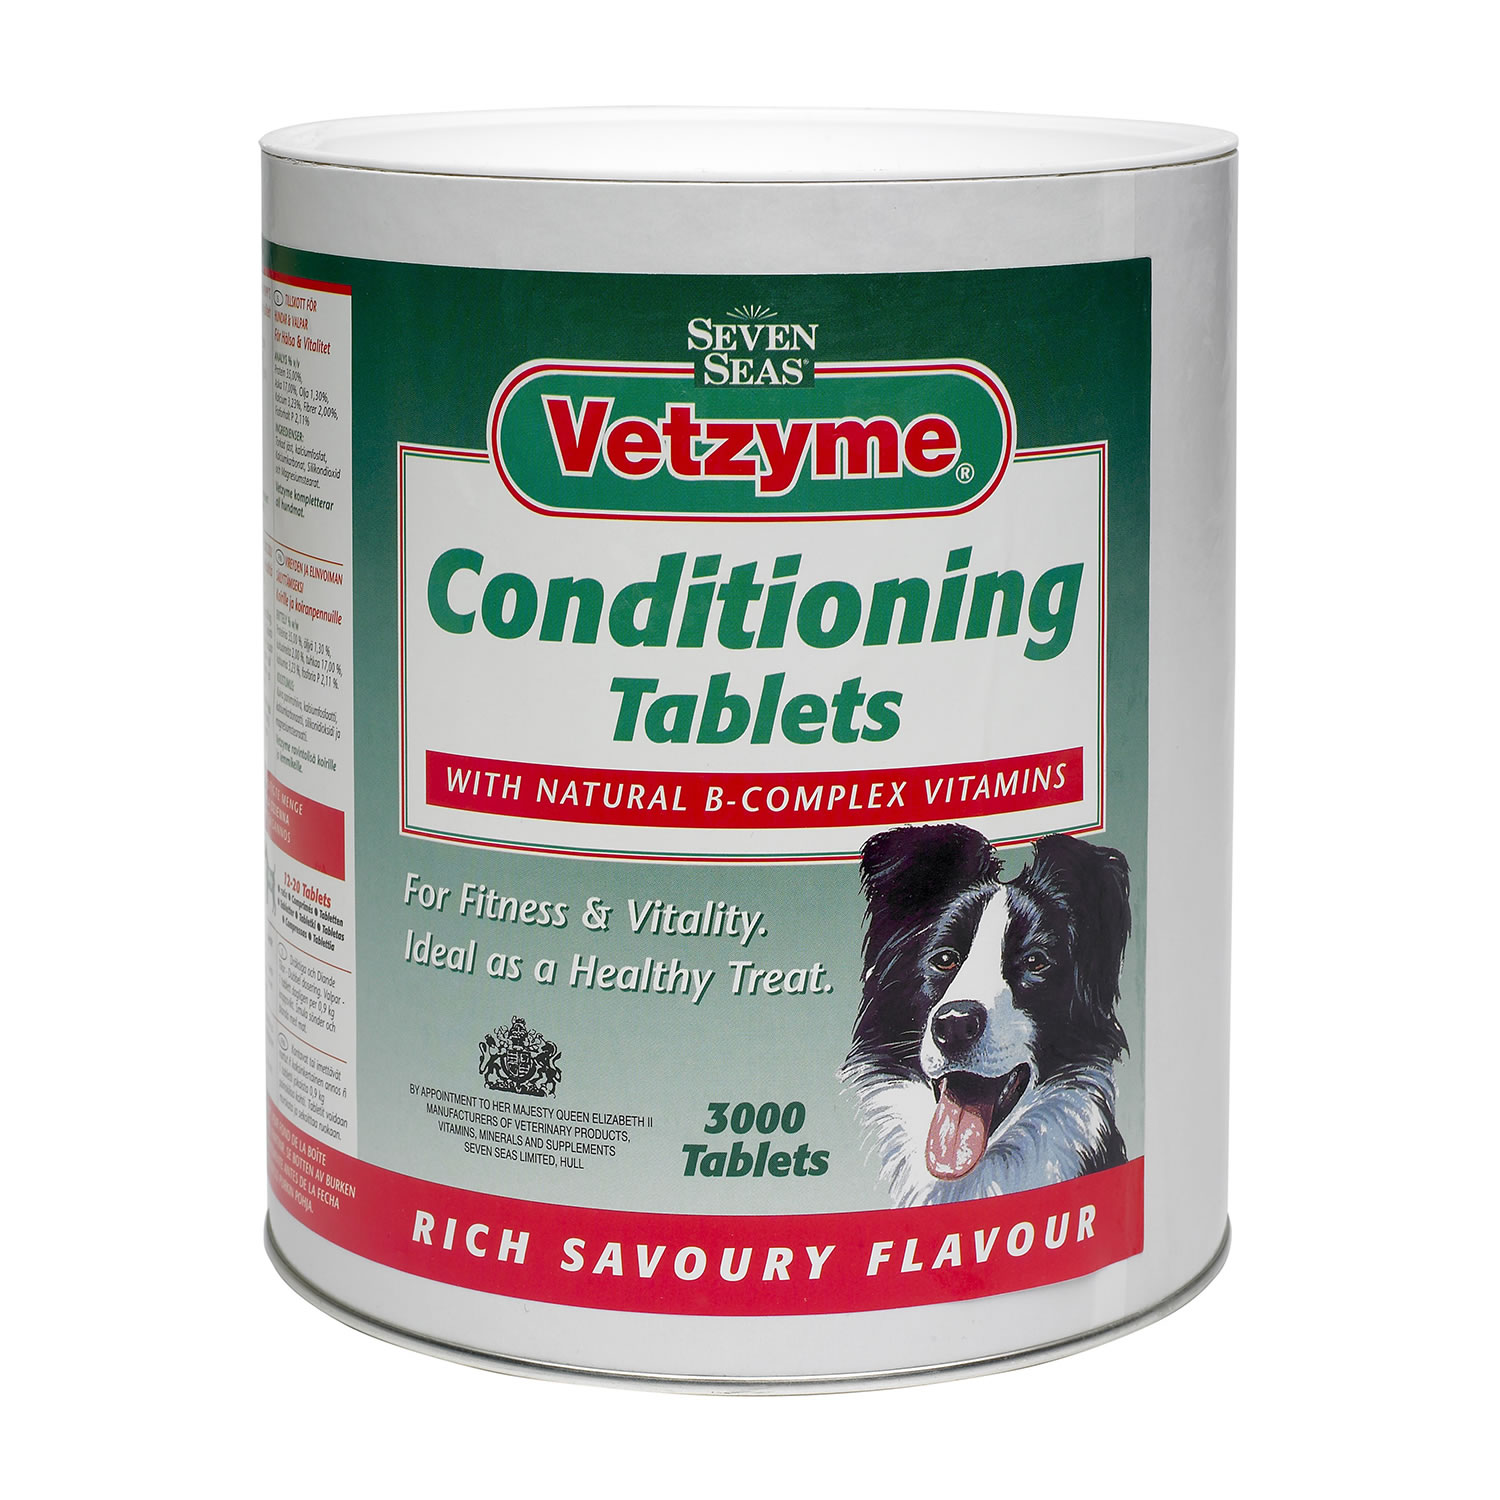 VETZYME CONDITIONING TABLETS  VETZYME CONDITIONING TABLETS  3000 PACK  3000 PACK